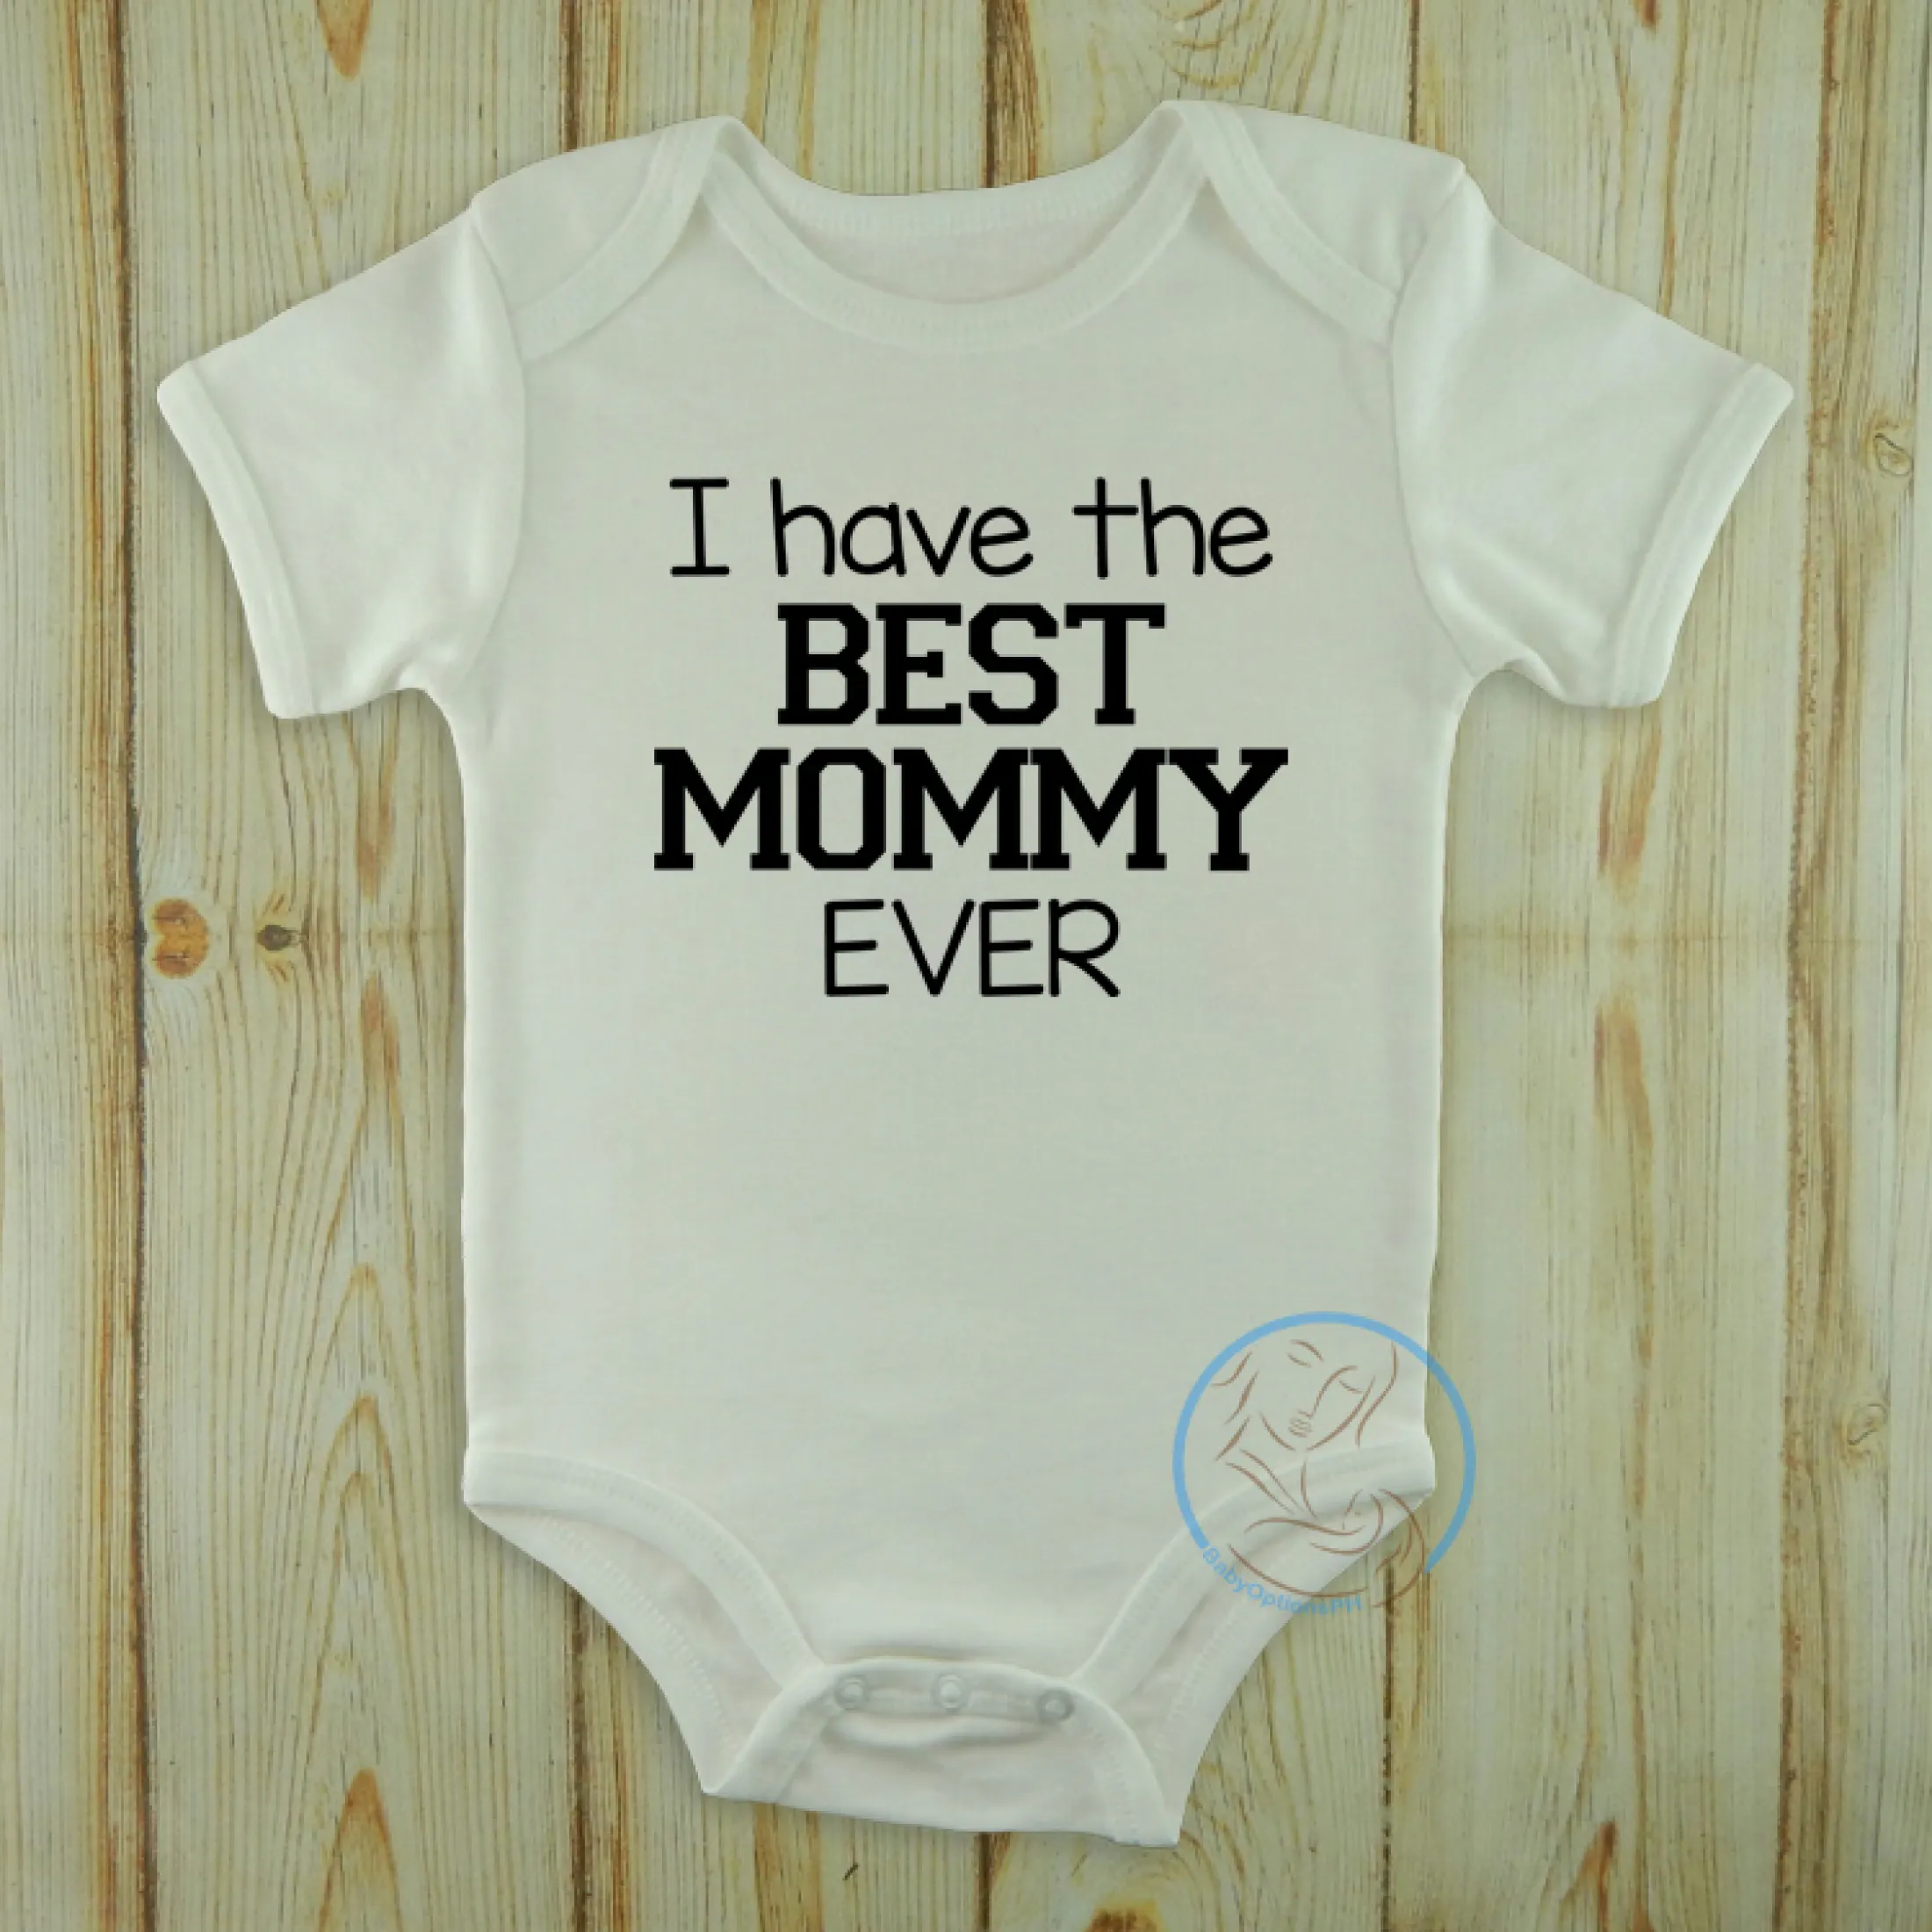 Baby Boys Girls Baby Grow Vest Bodysuit Short and Long Sleeve Mummy and Daddy/'s Little Miracle